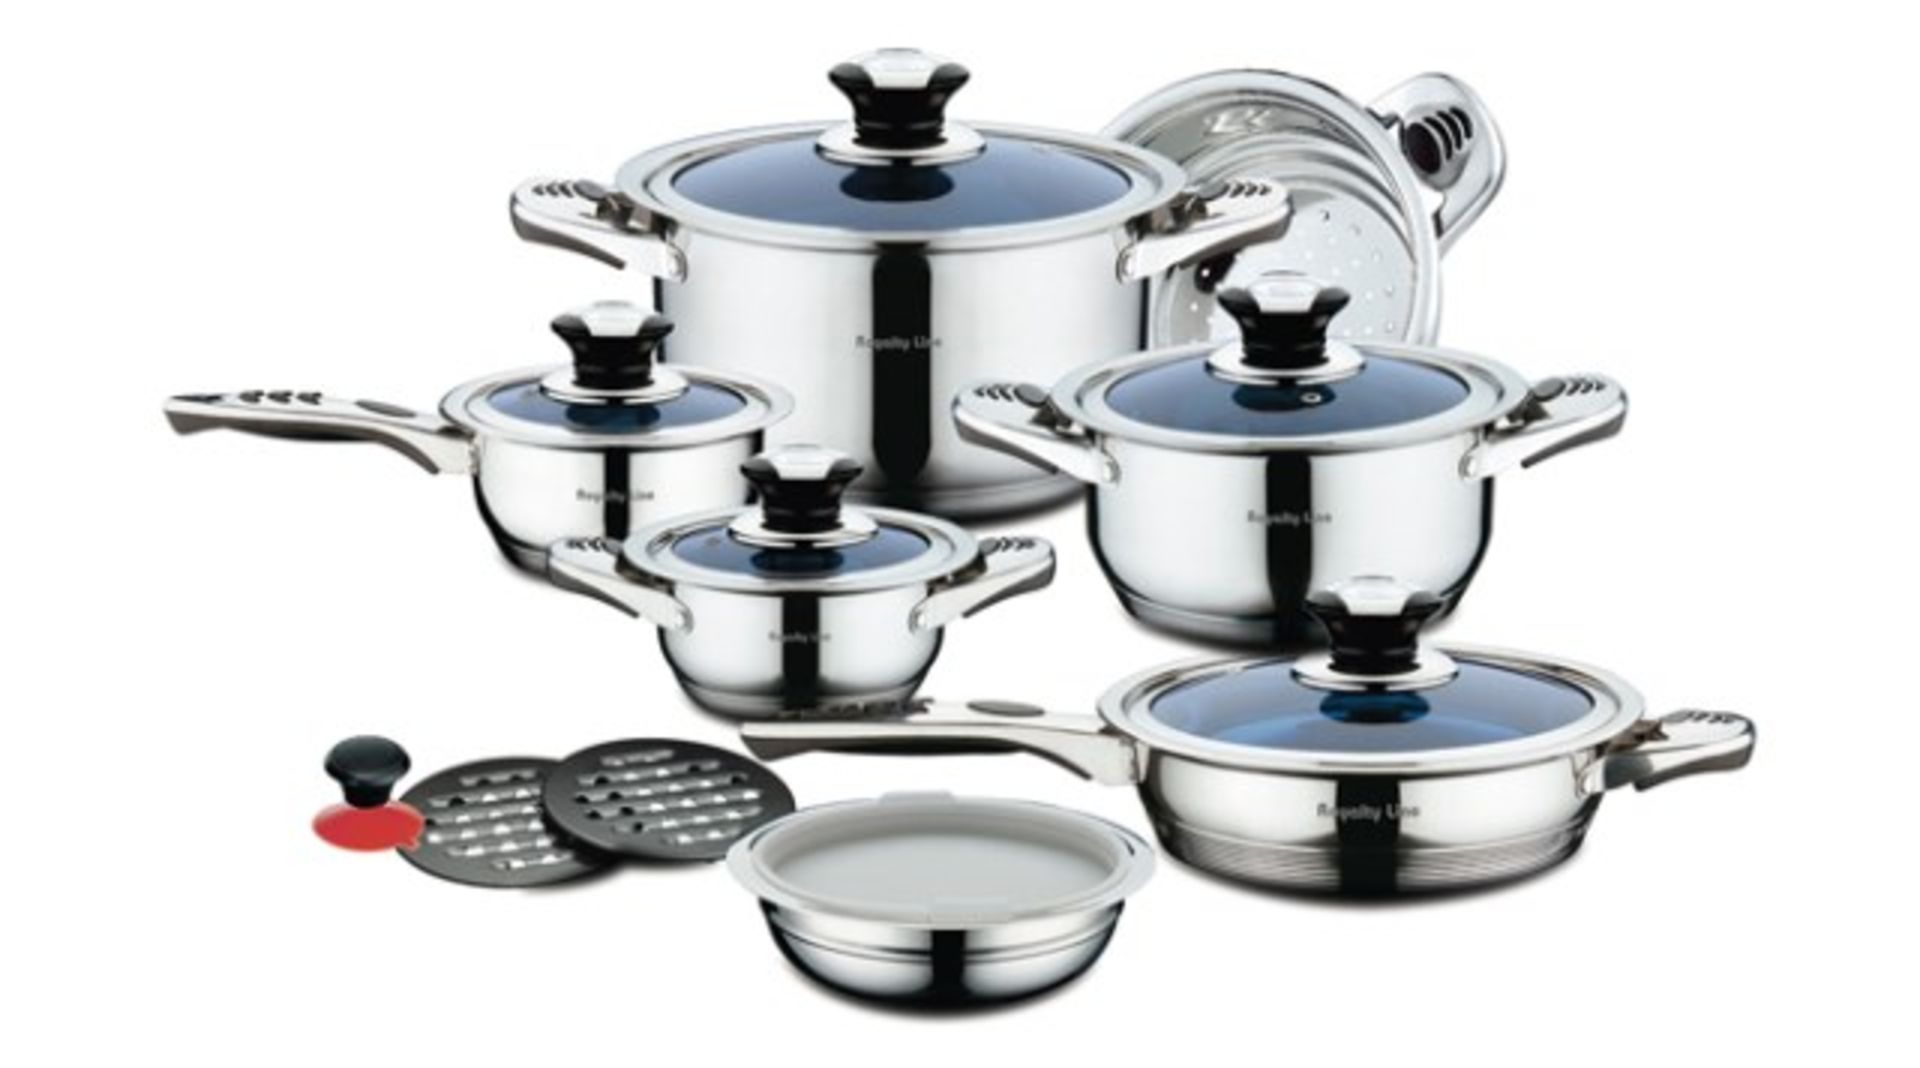 V Brand New 16 pce Stainless Steel Cookware Set Suitable For All Types Of Stoves Inc 3 Casseroles